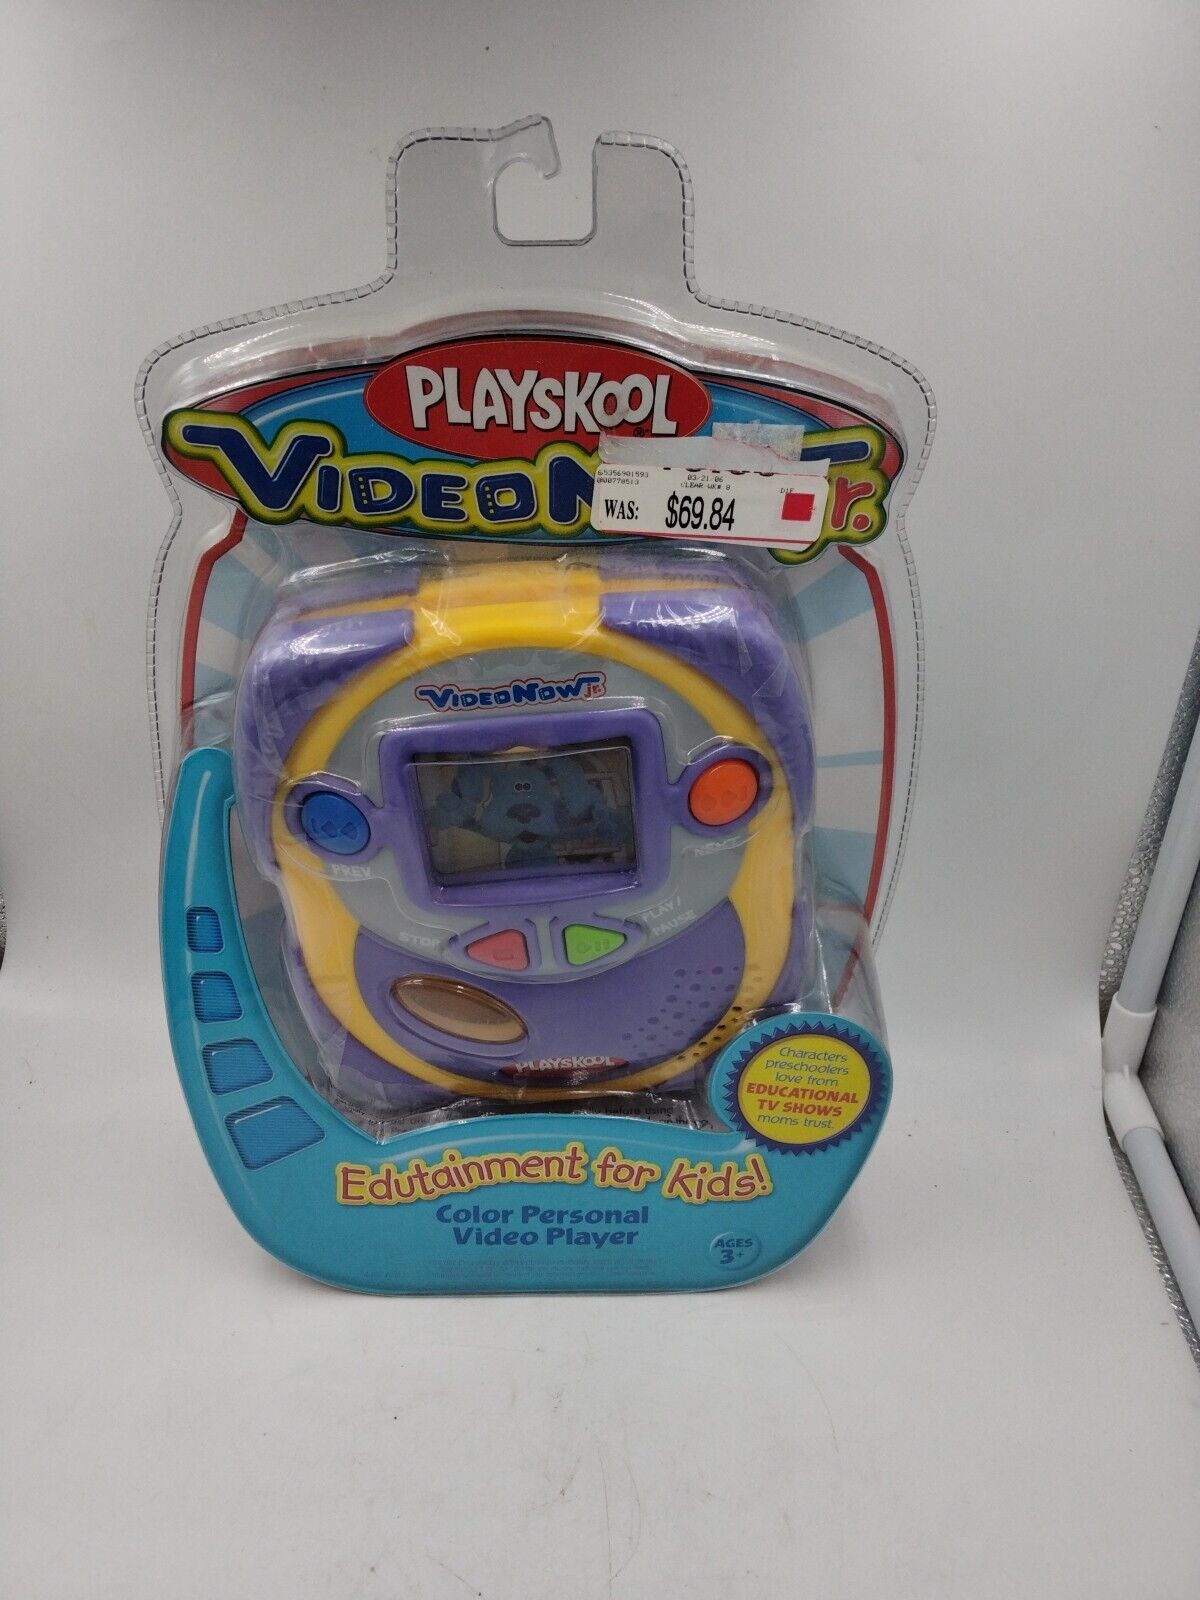 Playskool VIDEO NOW JR. - Color Personal Video Player - NEW (NOS) - Purple  Playskool Does Not Apply